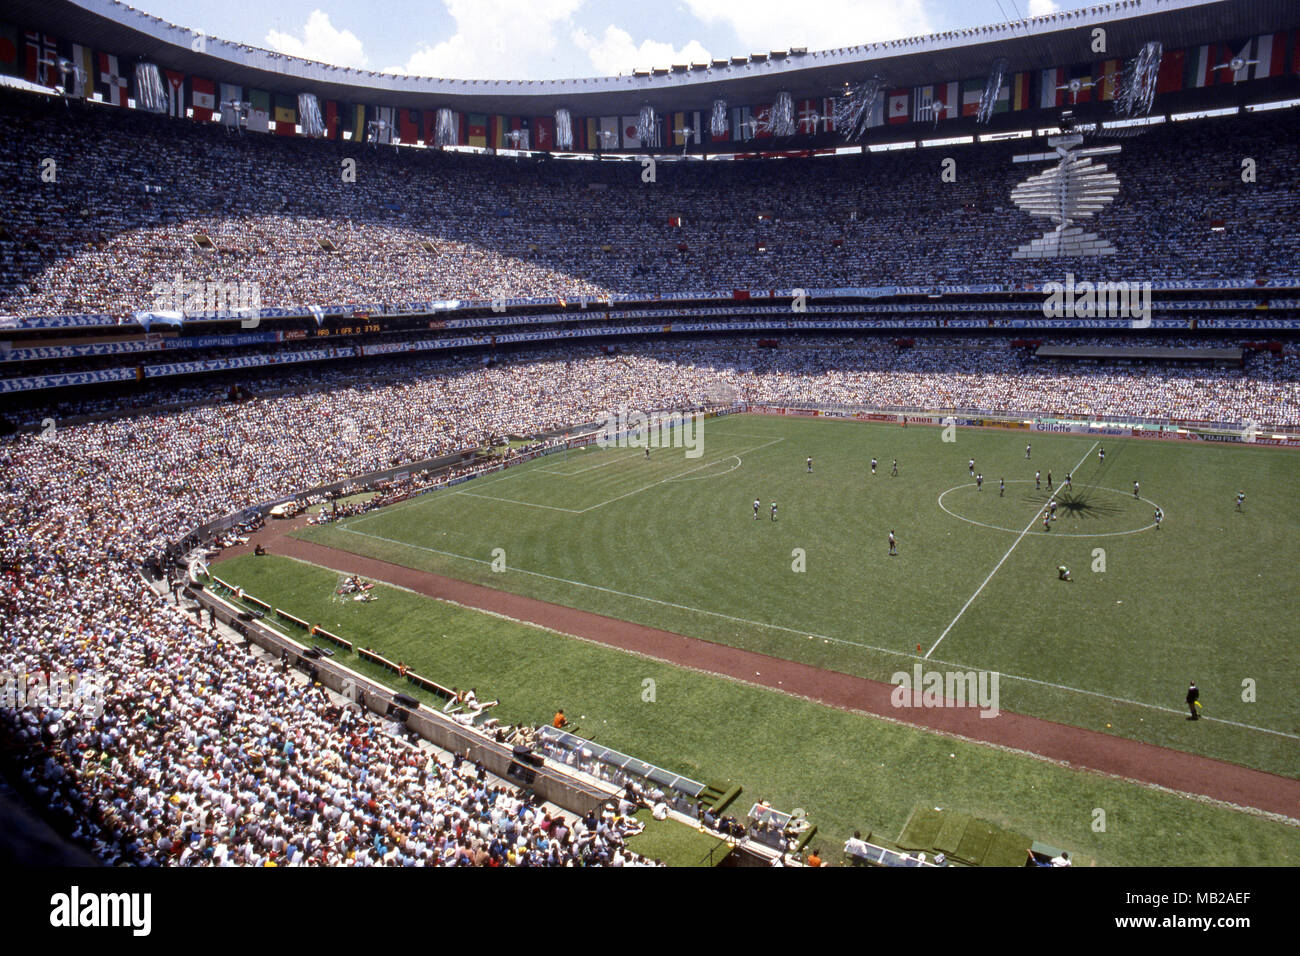 Fifa World Cup Mexico 1986 29 6 1986 Estadio Azteca Mexico D F Final Argentina V West Germany Azteca Stadium During The Final Stock Photo Alamy